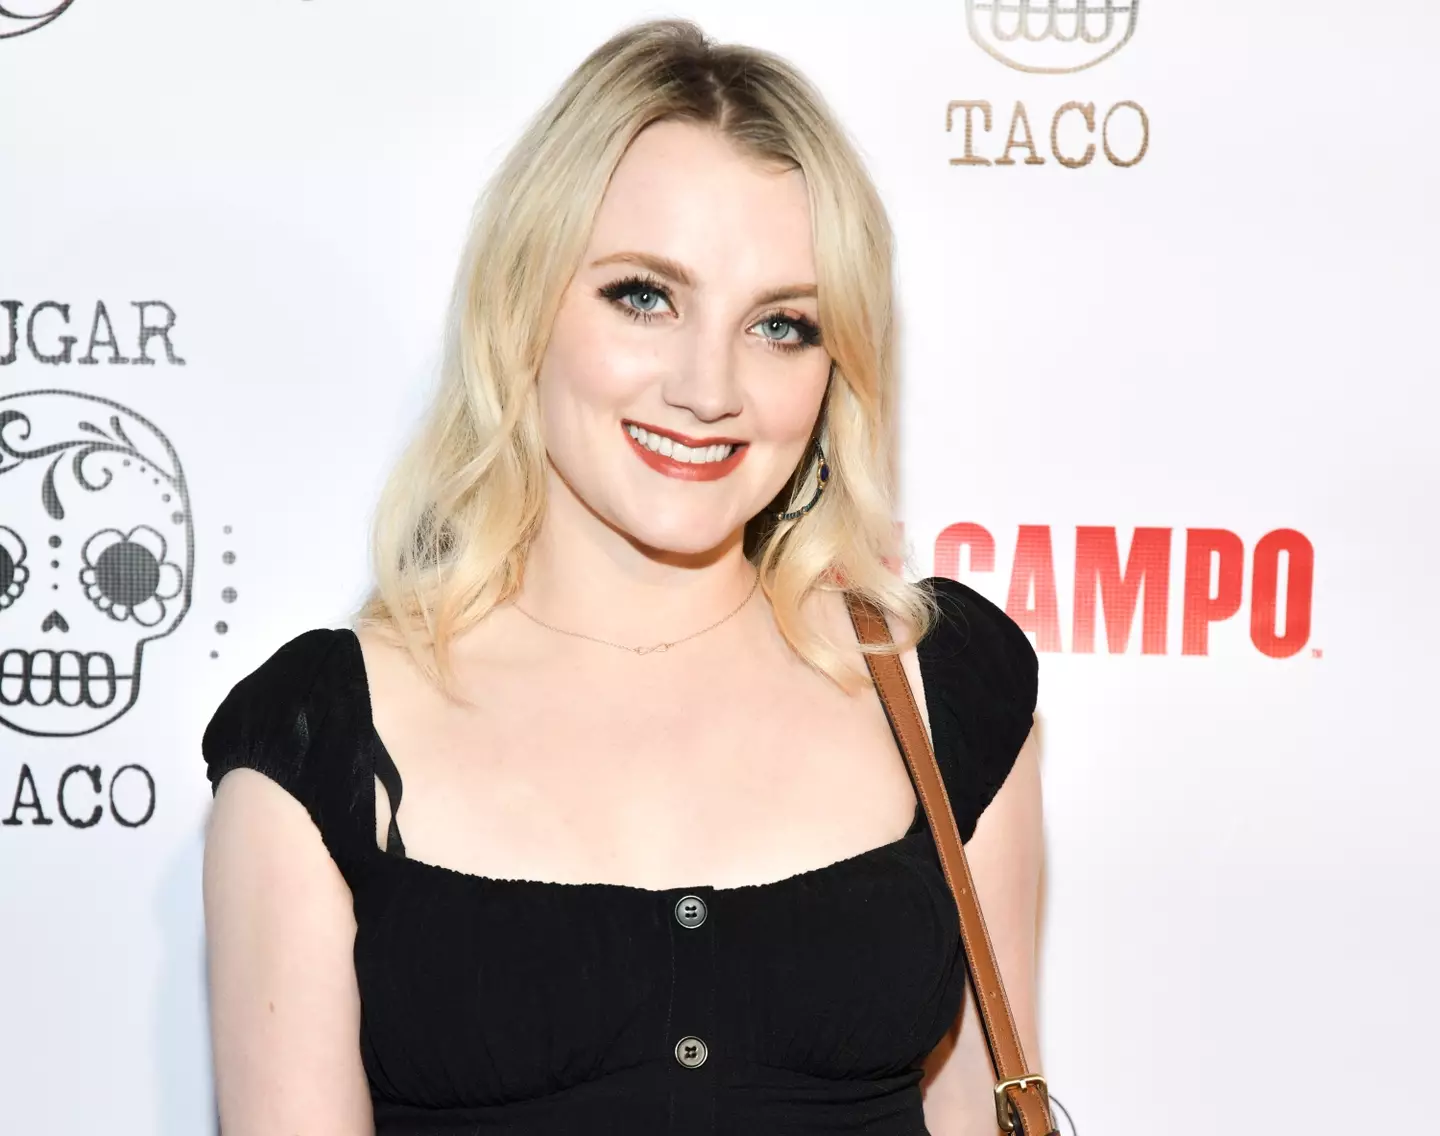 Between 2007 and 2016 Evanna Lynch dated a Harry Potter co-star.